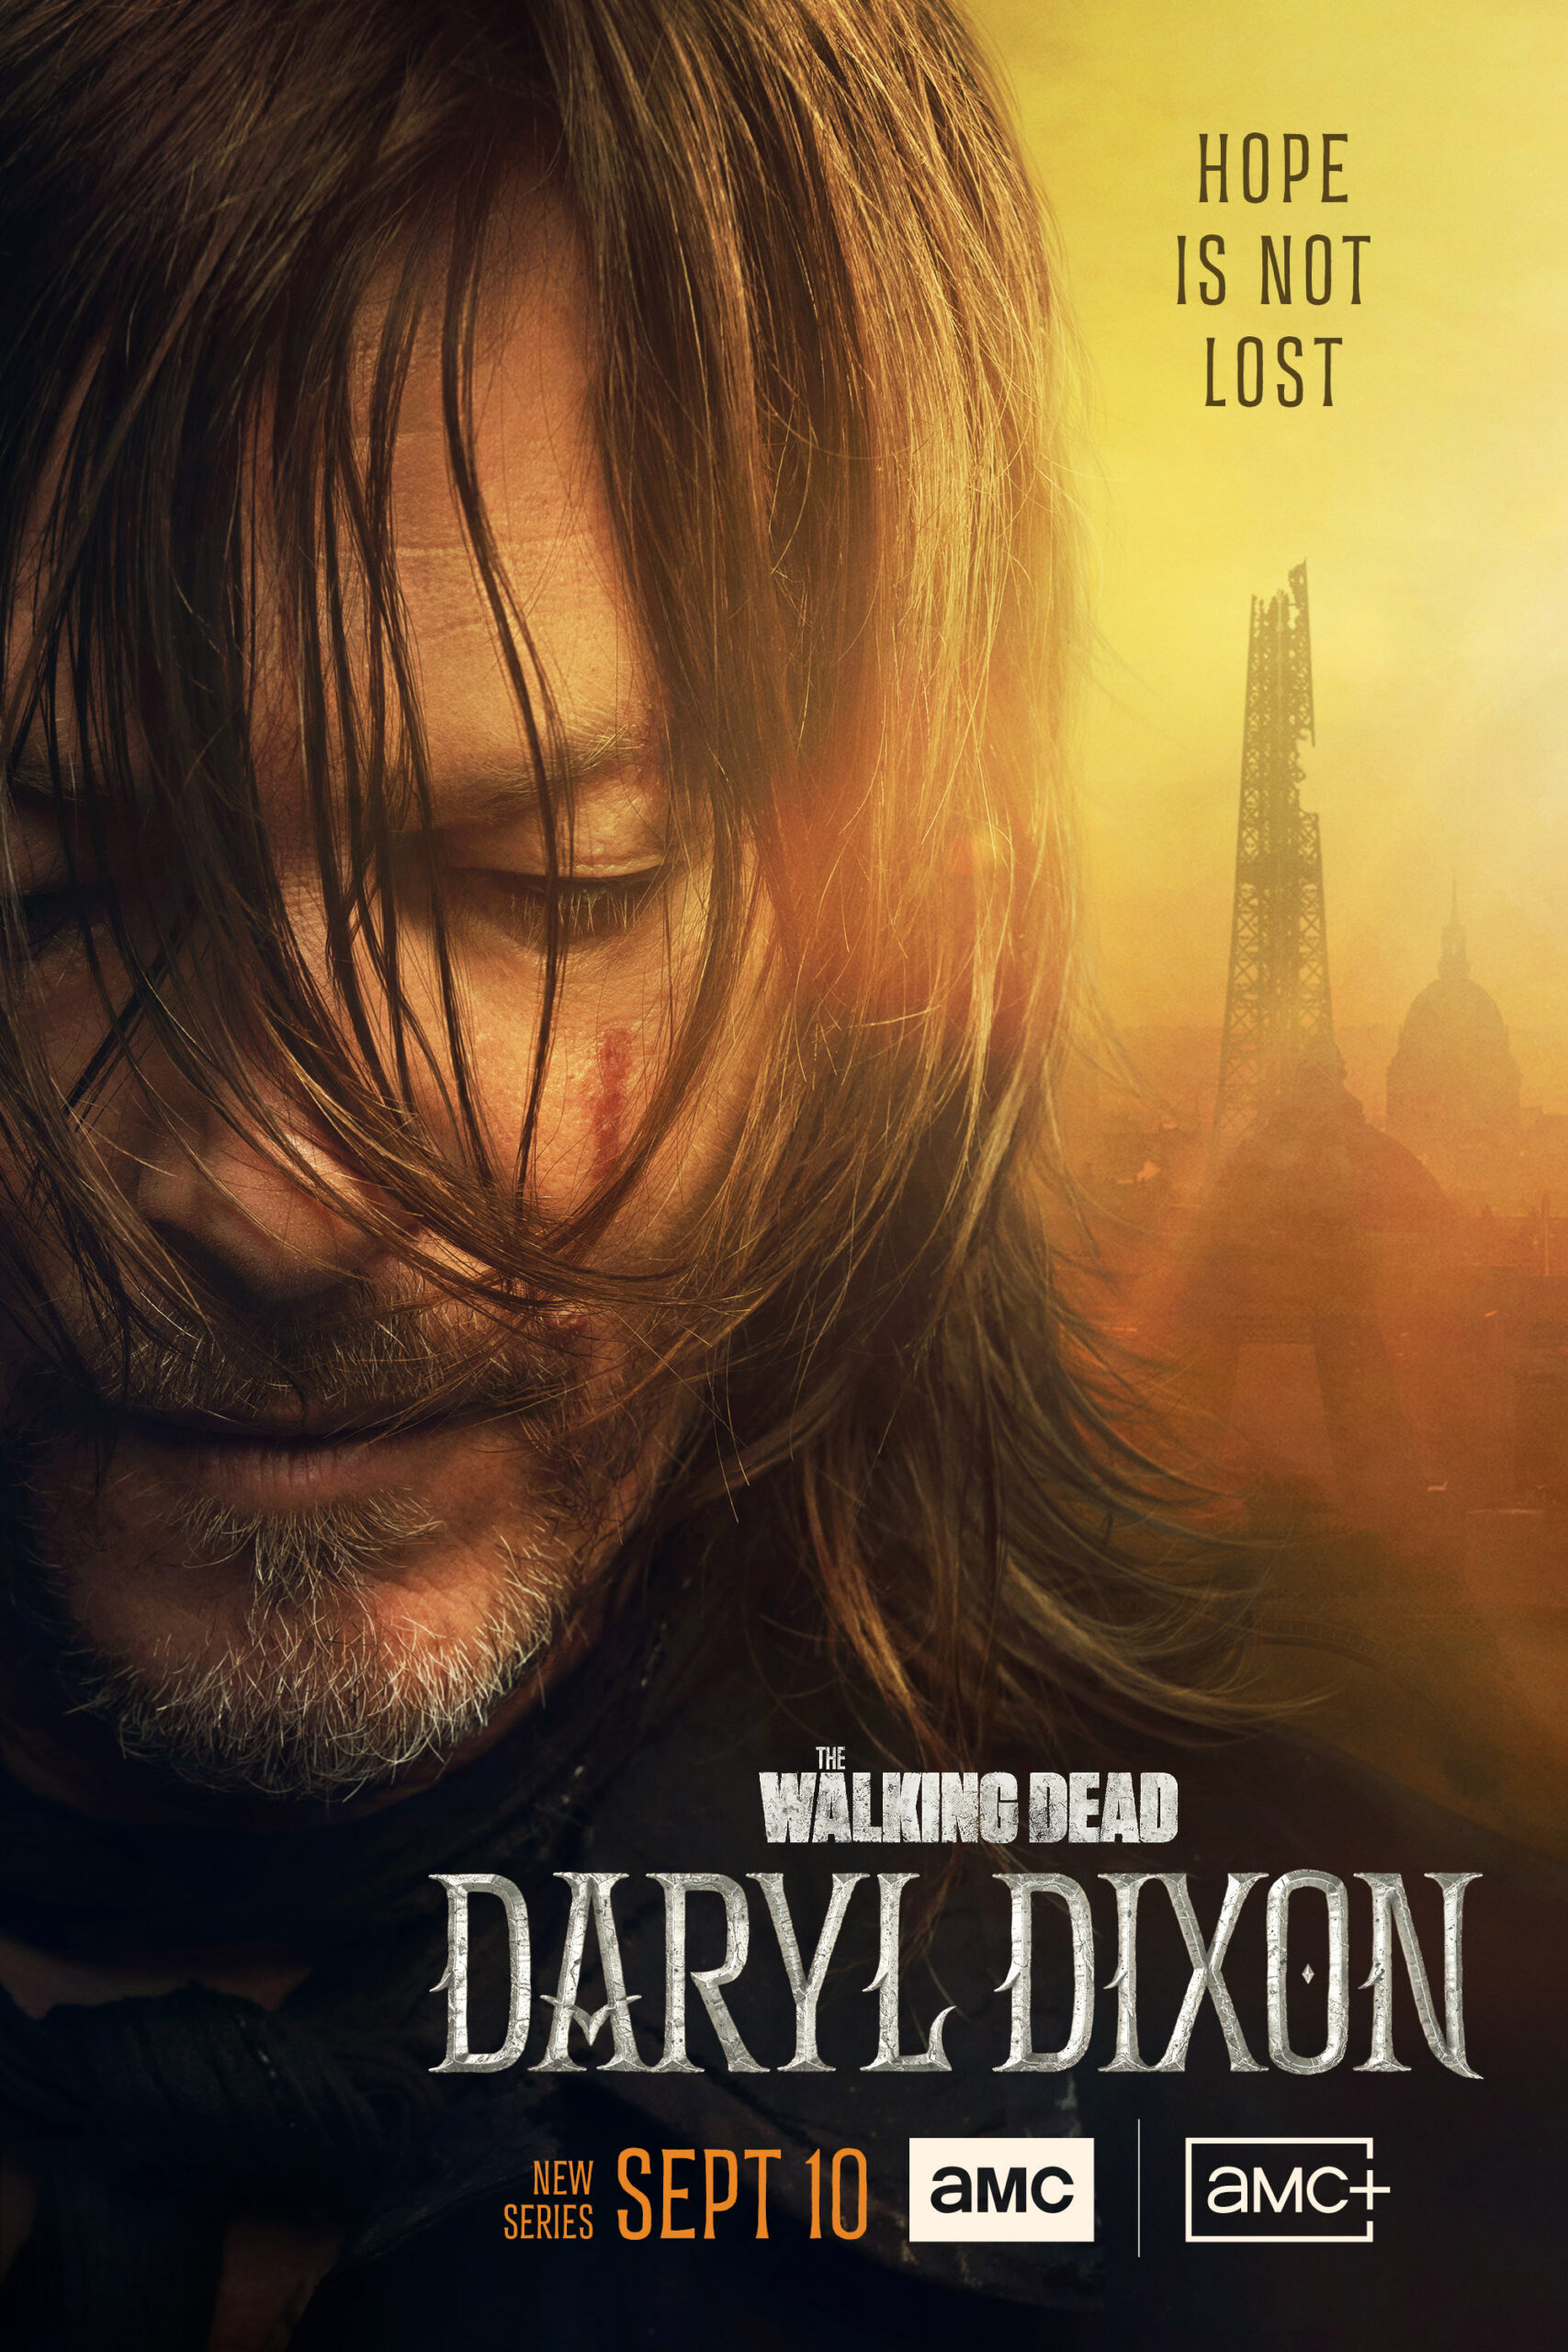 Key art for The Walking Dead: Daryl Dixon spinoff. Art provided by AMC Networks